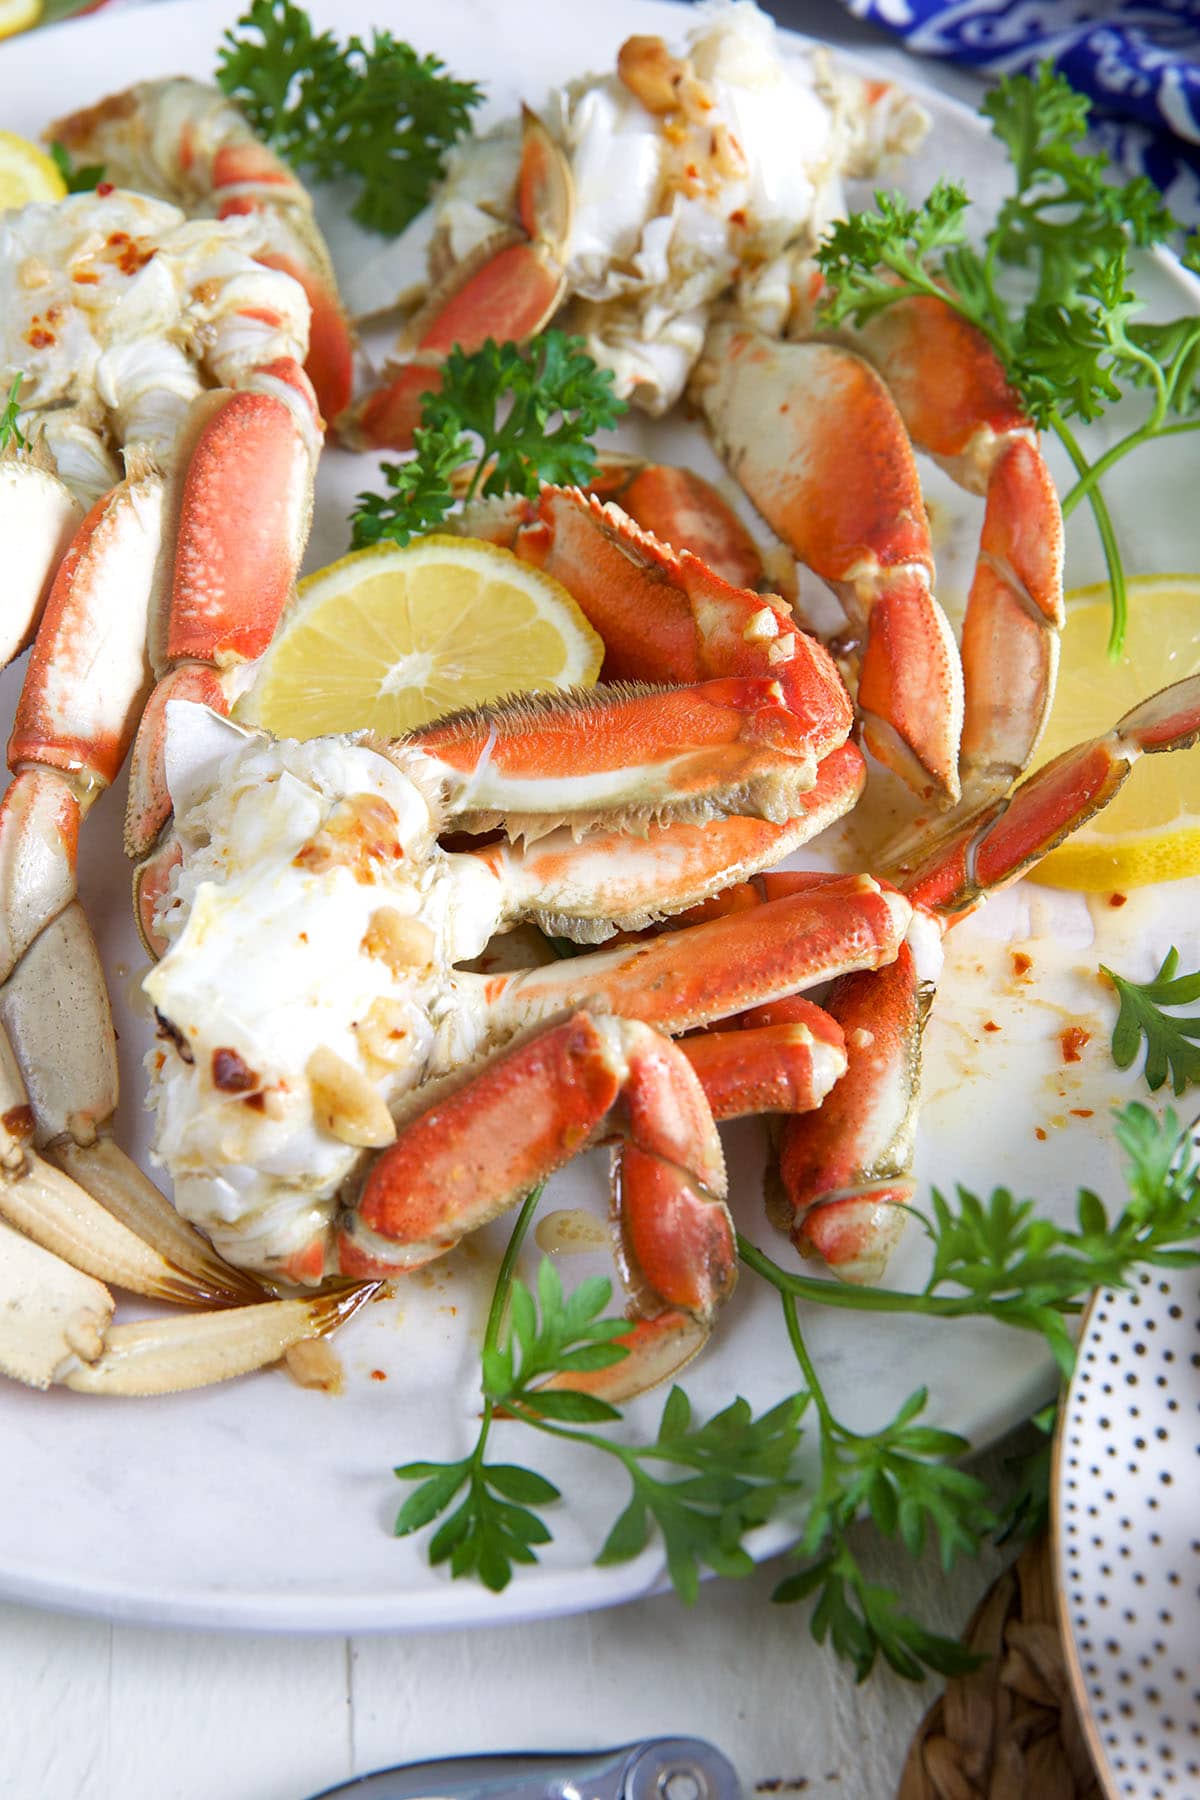 Crab legs are cooked and arranged on a white plate.